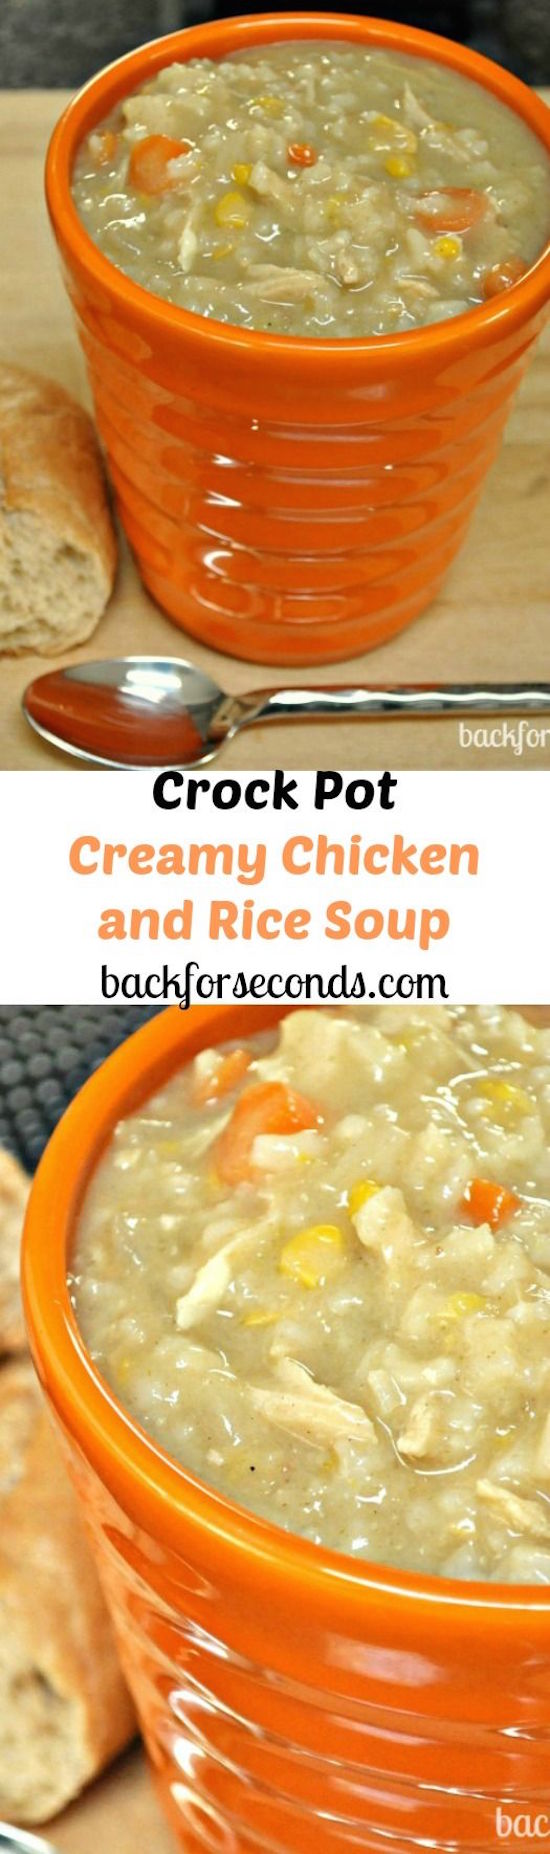 Creamy Chicken and Rice Soup Recipe made in the Crock Pot